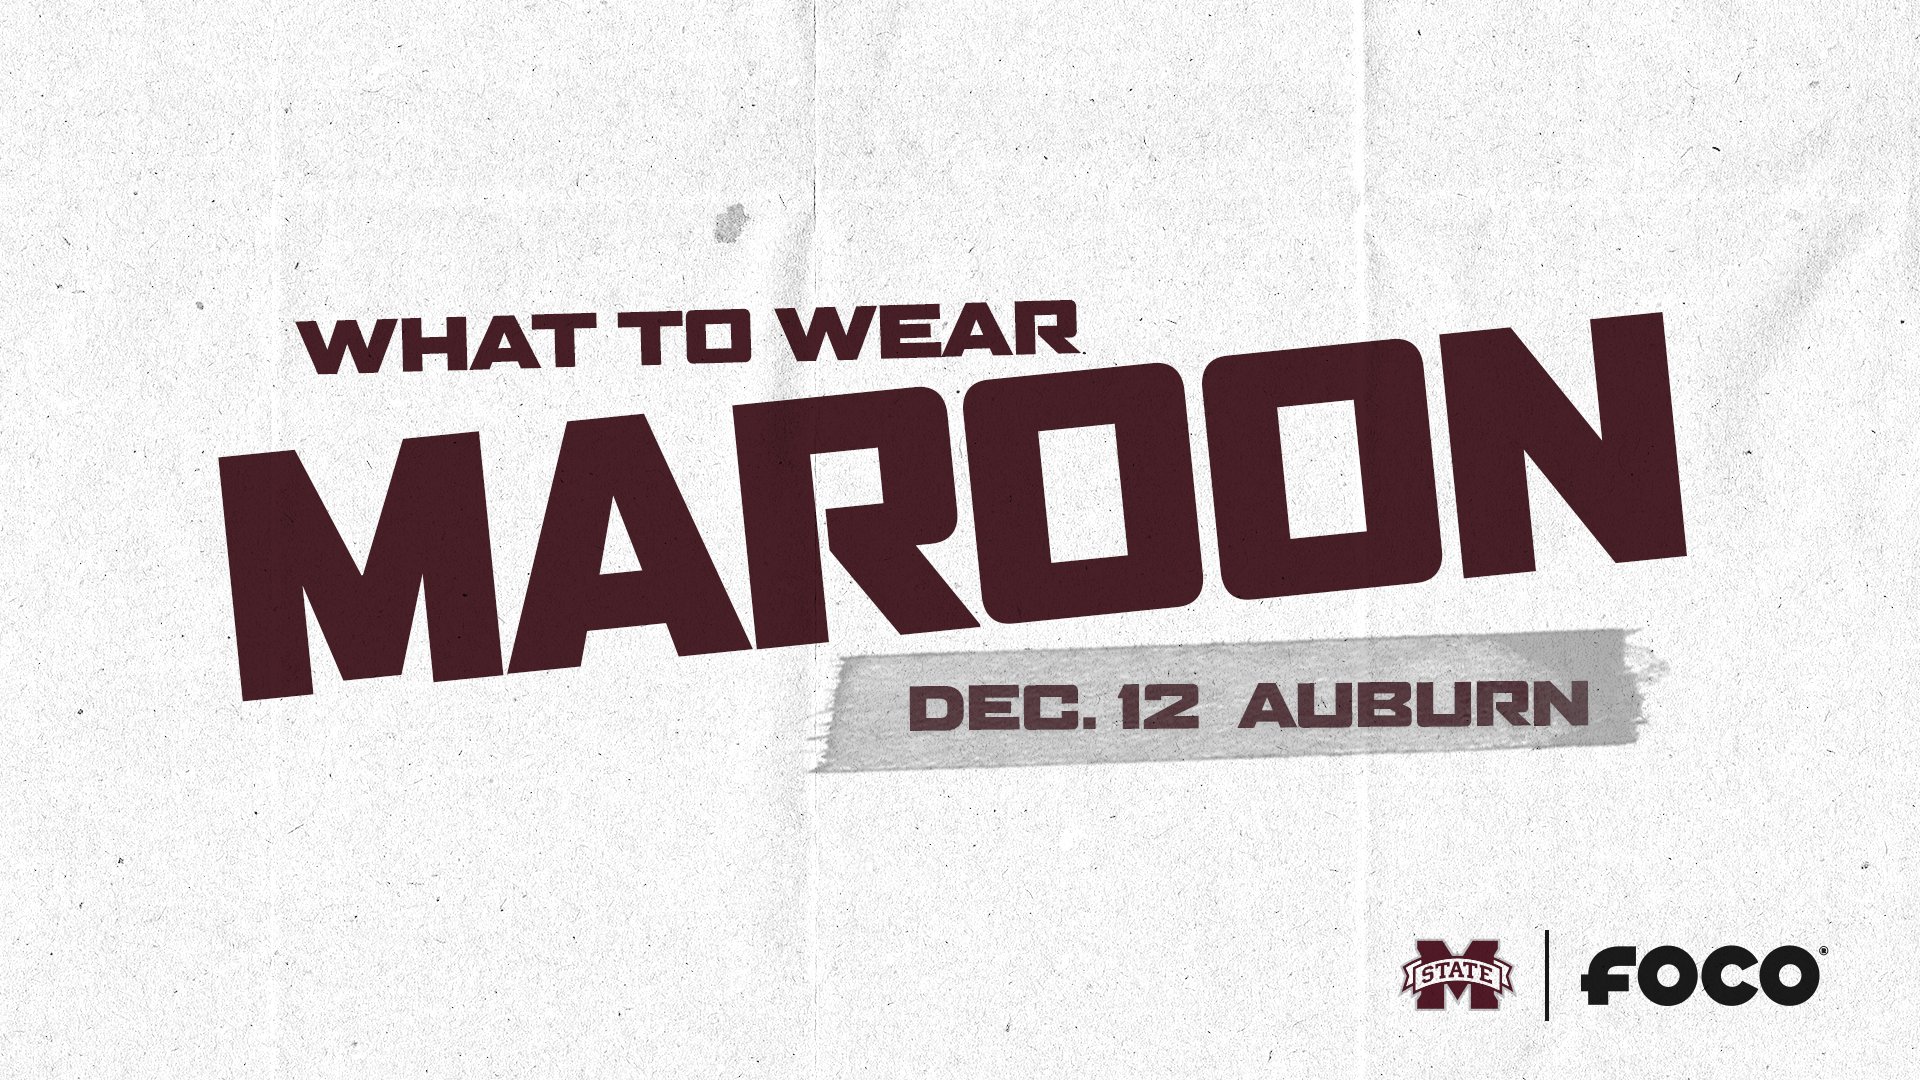 The words "What to Wear Maroon" in large letters reminding fans what color to wear for MSU's Dec. 12 football game versus Auburn